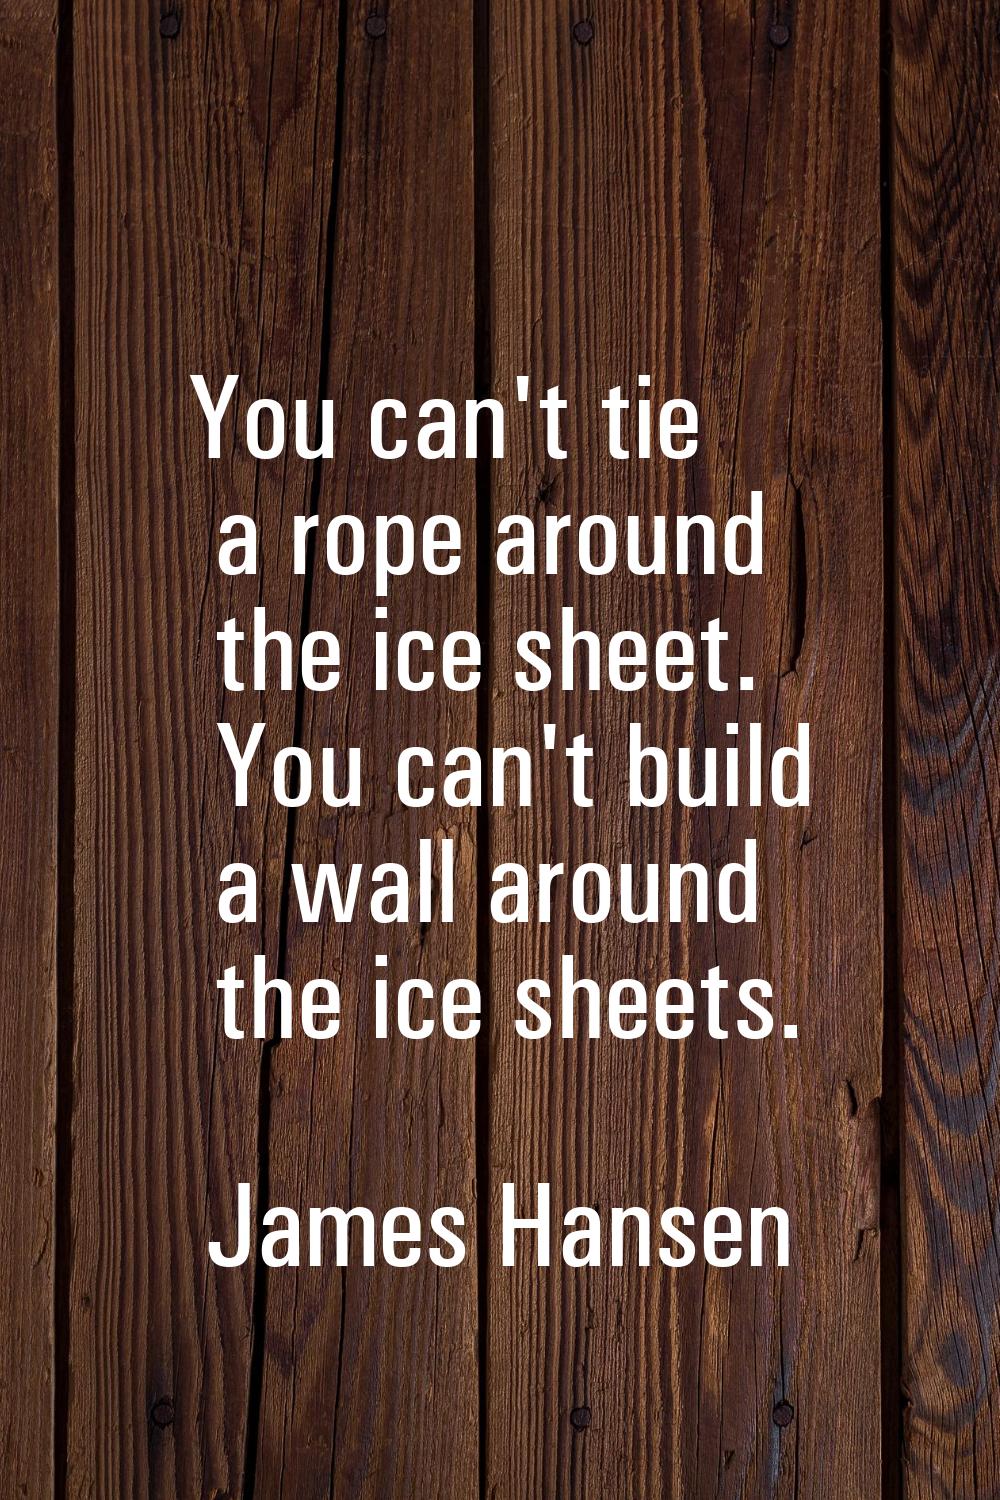 You can't tie a rope around the ice sheet. You can't build a wall around the ice sheets.